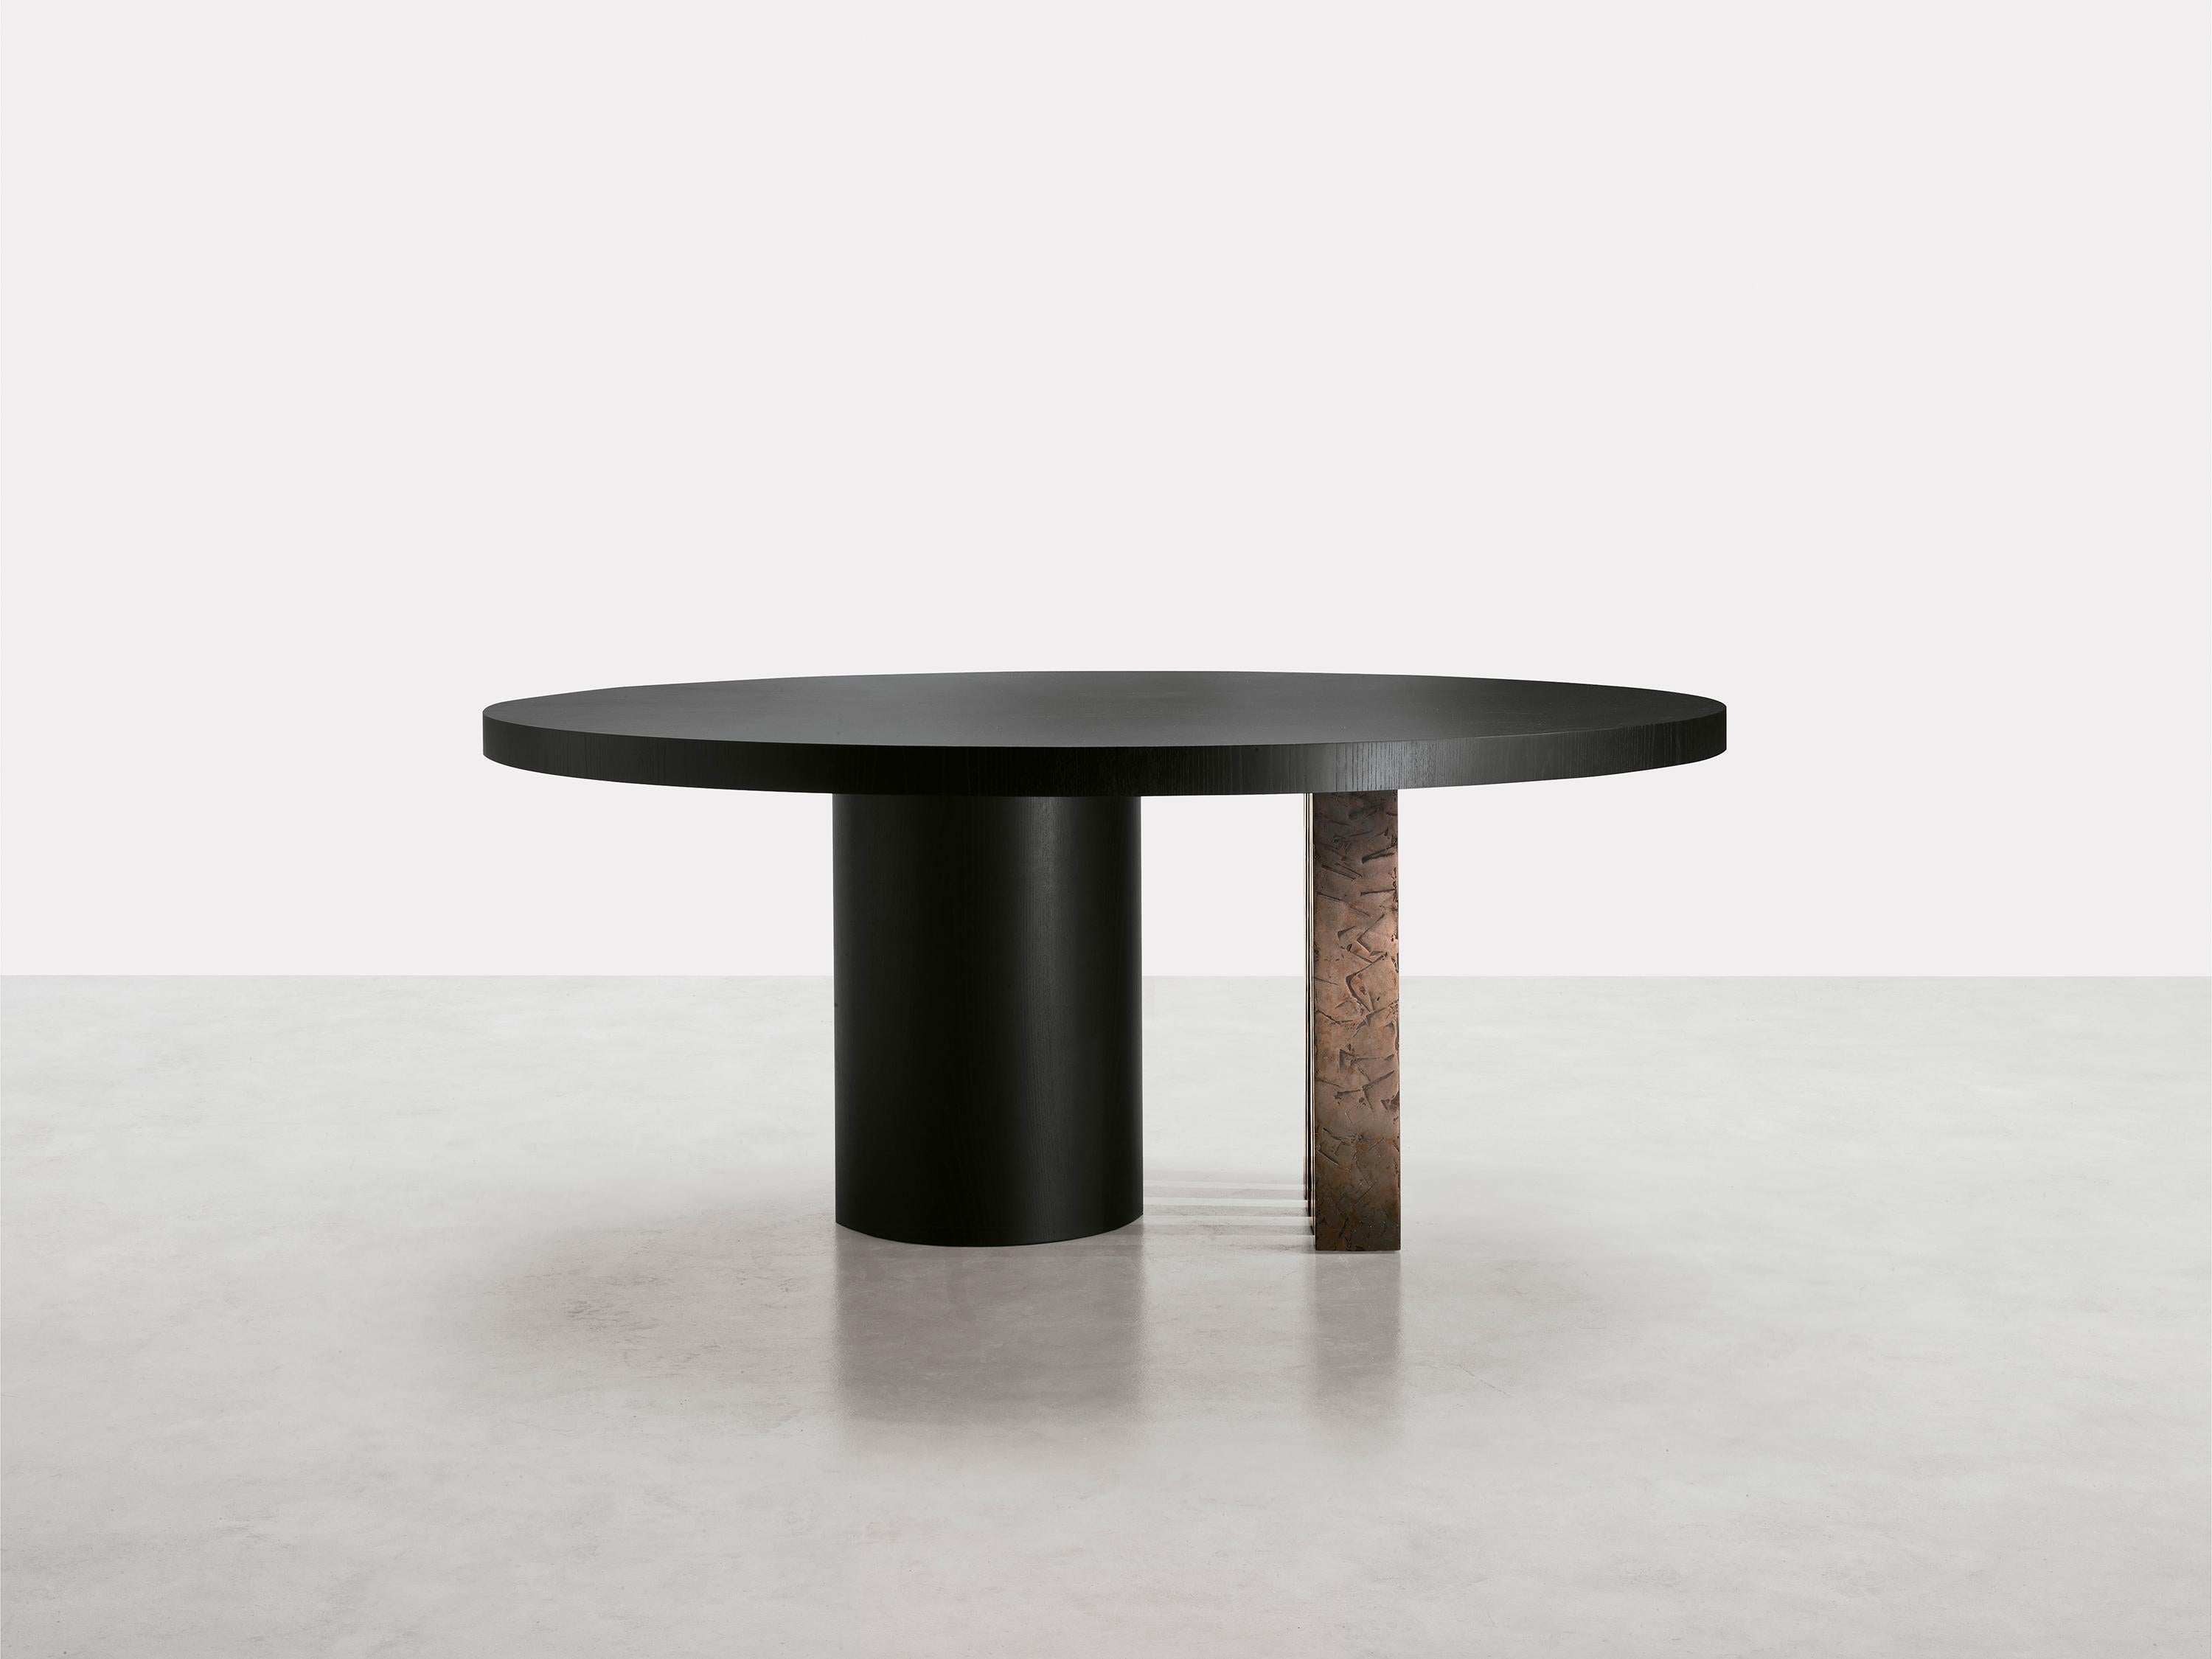 The two tables, in rectangular and round versions, are inspired by the spectacular landscape of the U.S.
Ozarks mountain range region: forests of towering trees with regular, straight trunks tend upward in contrast
to the horizontal placidity of the